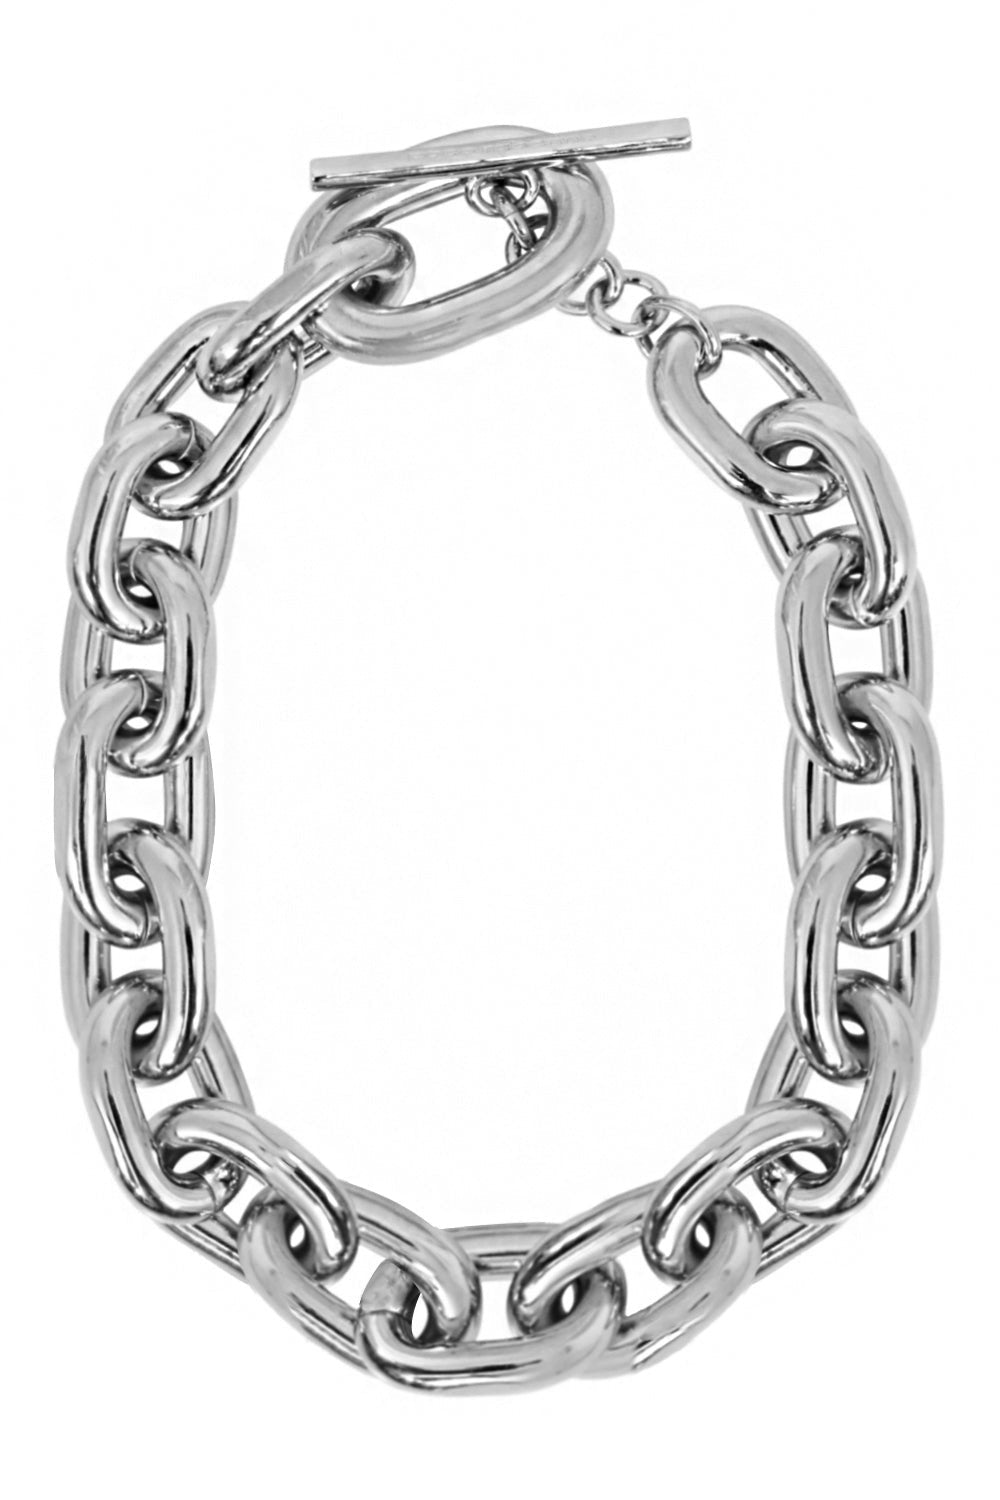 PACO RABANNE JEWELLERY SILVER XL LINK NECKLACE | SILVER